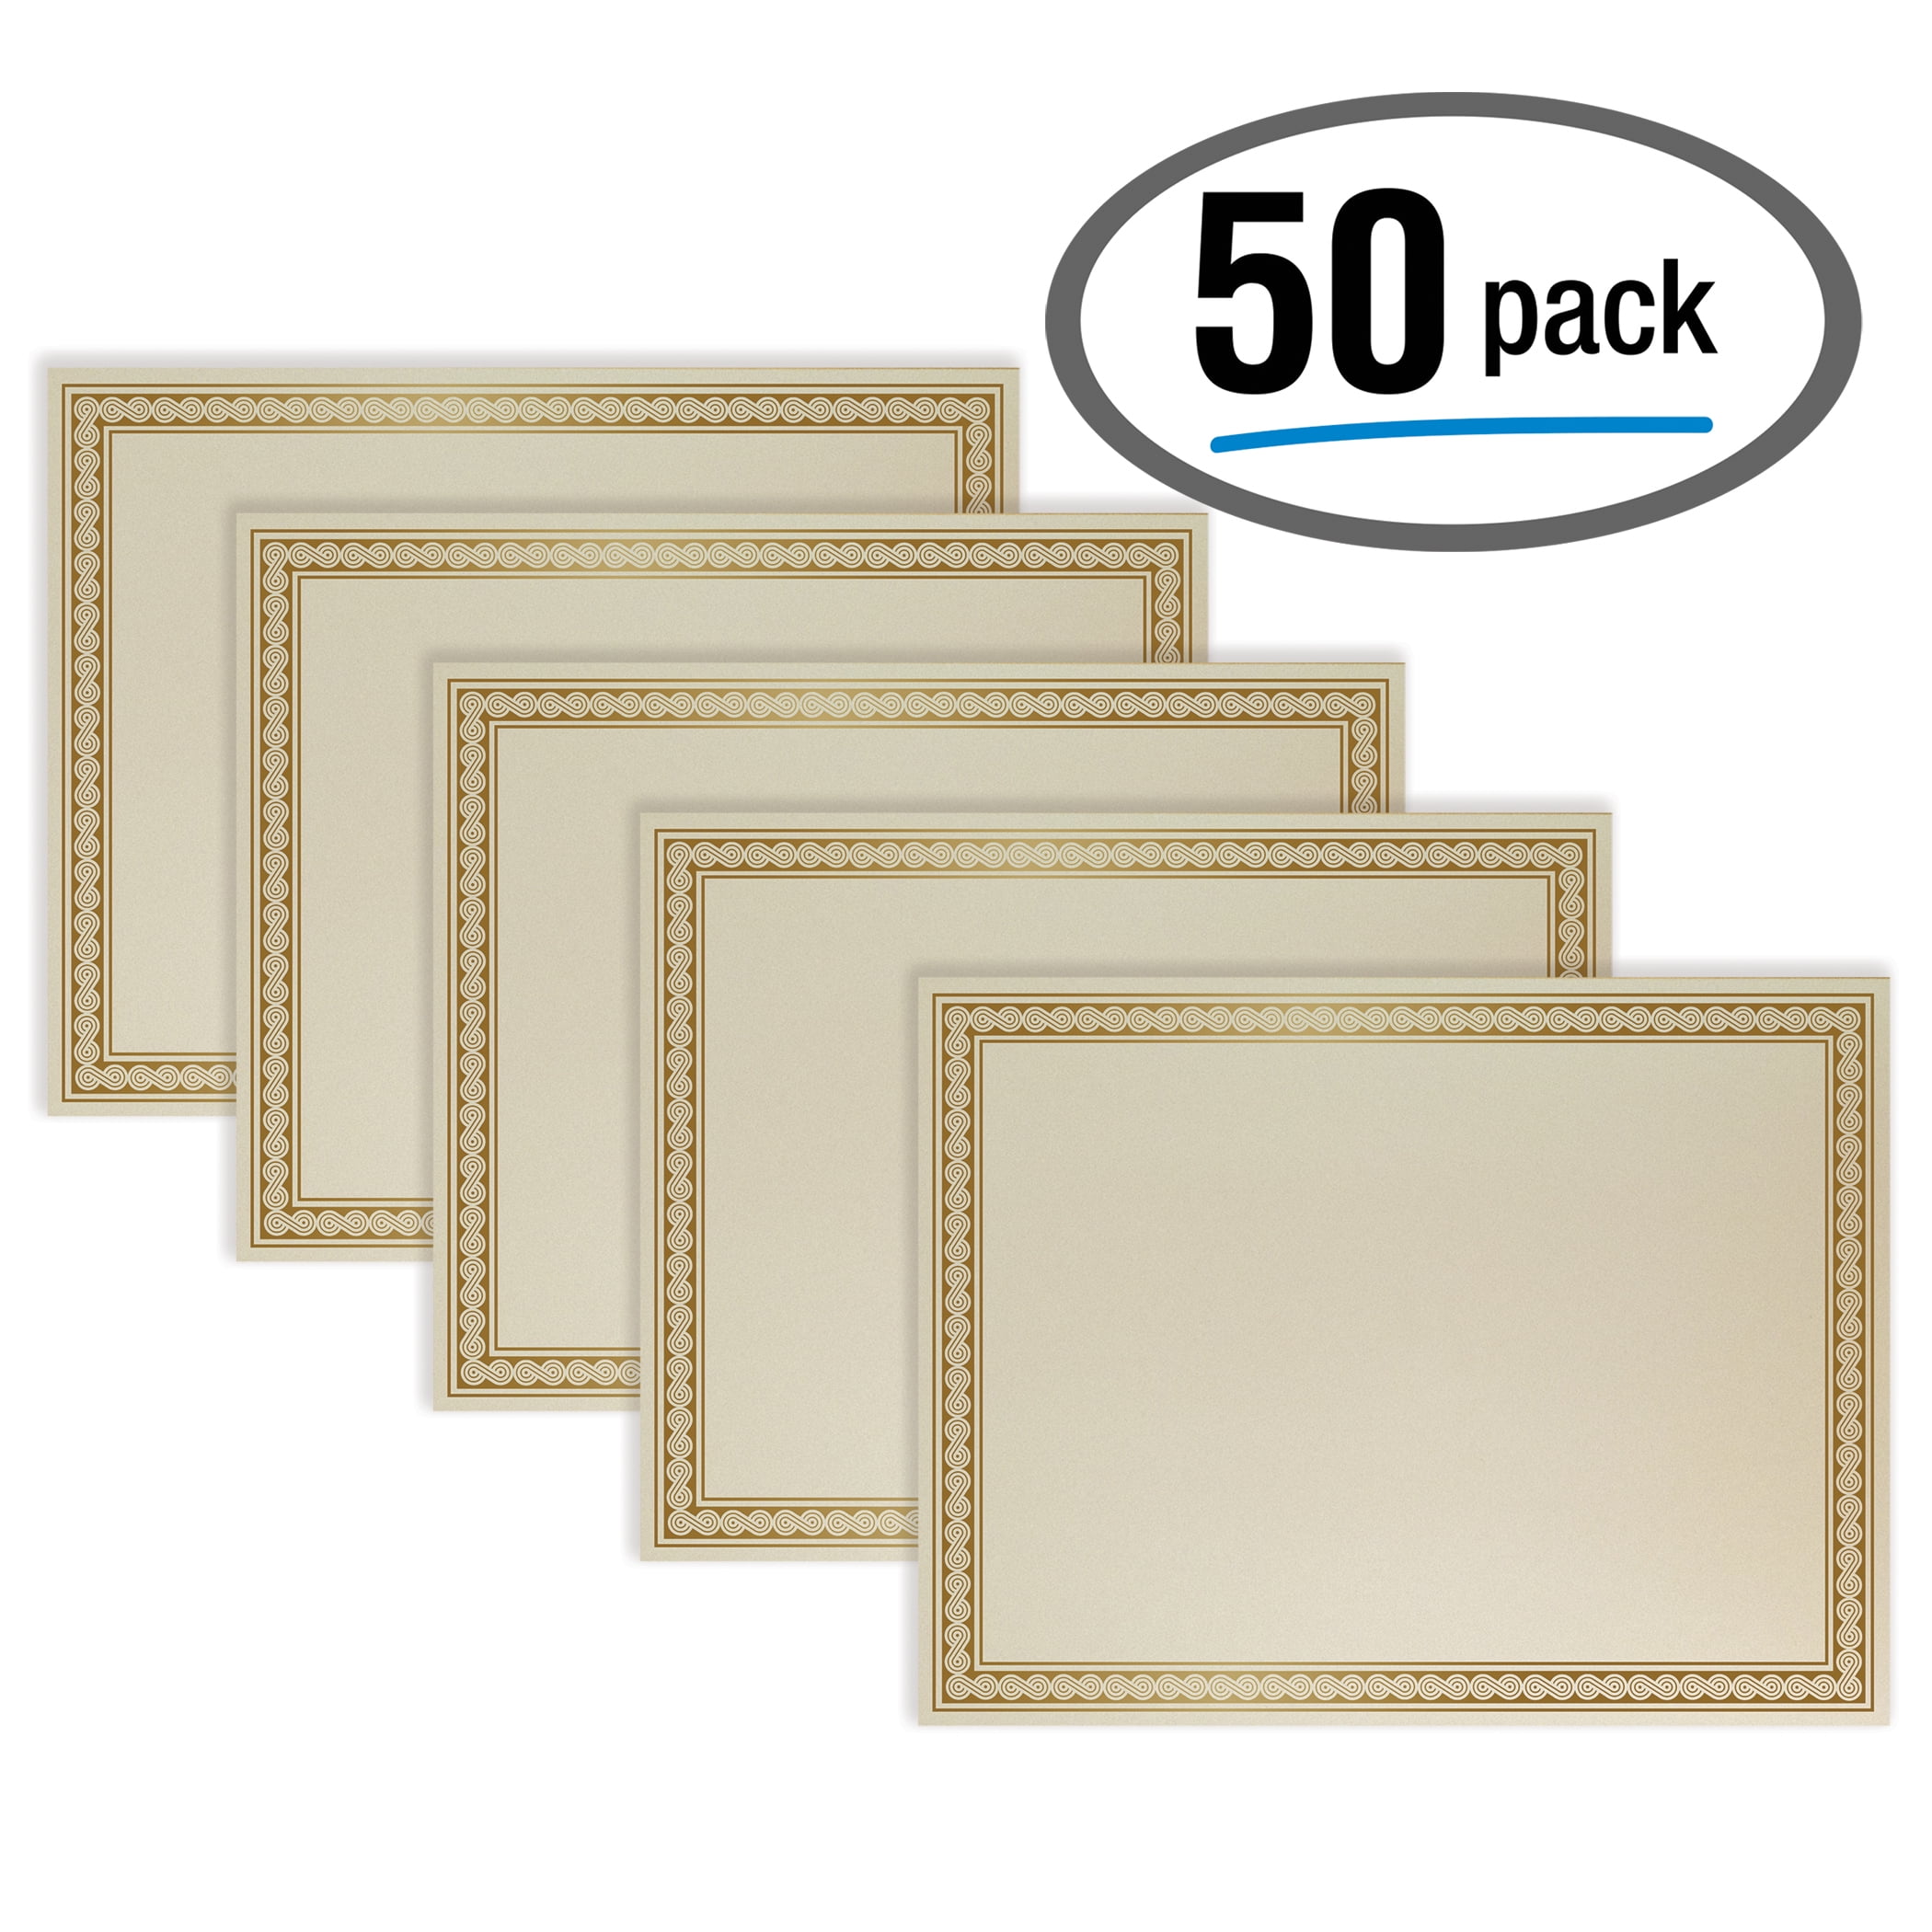  STOBOK 20 Pcs Certificate Inner Page Certificate Paper for  Printing Writable Certificate Paper Blank Resumes Paper Office Stuff  Certificate Interior Paper Gold Leaf Printable A4 : Office Products